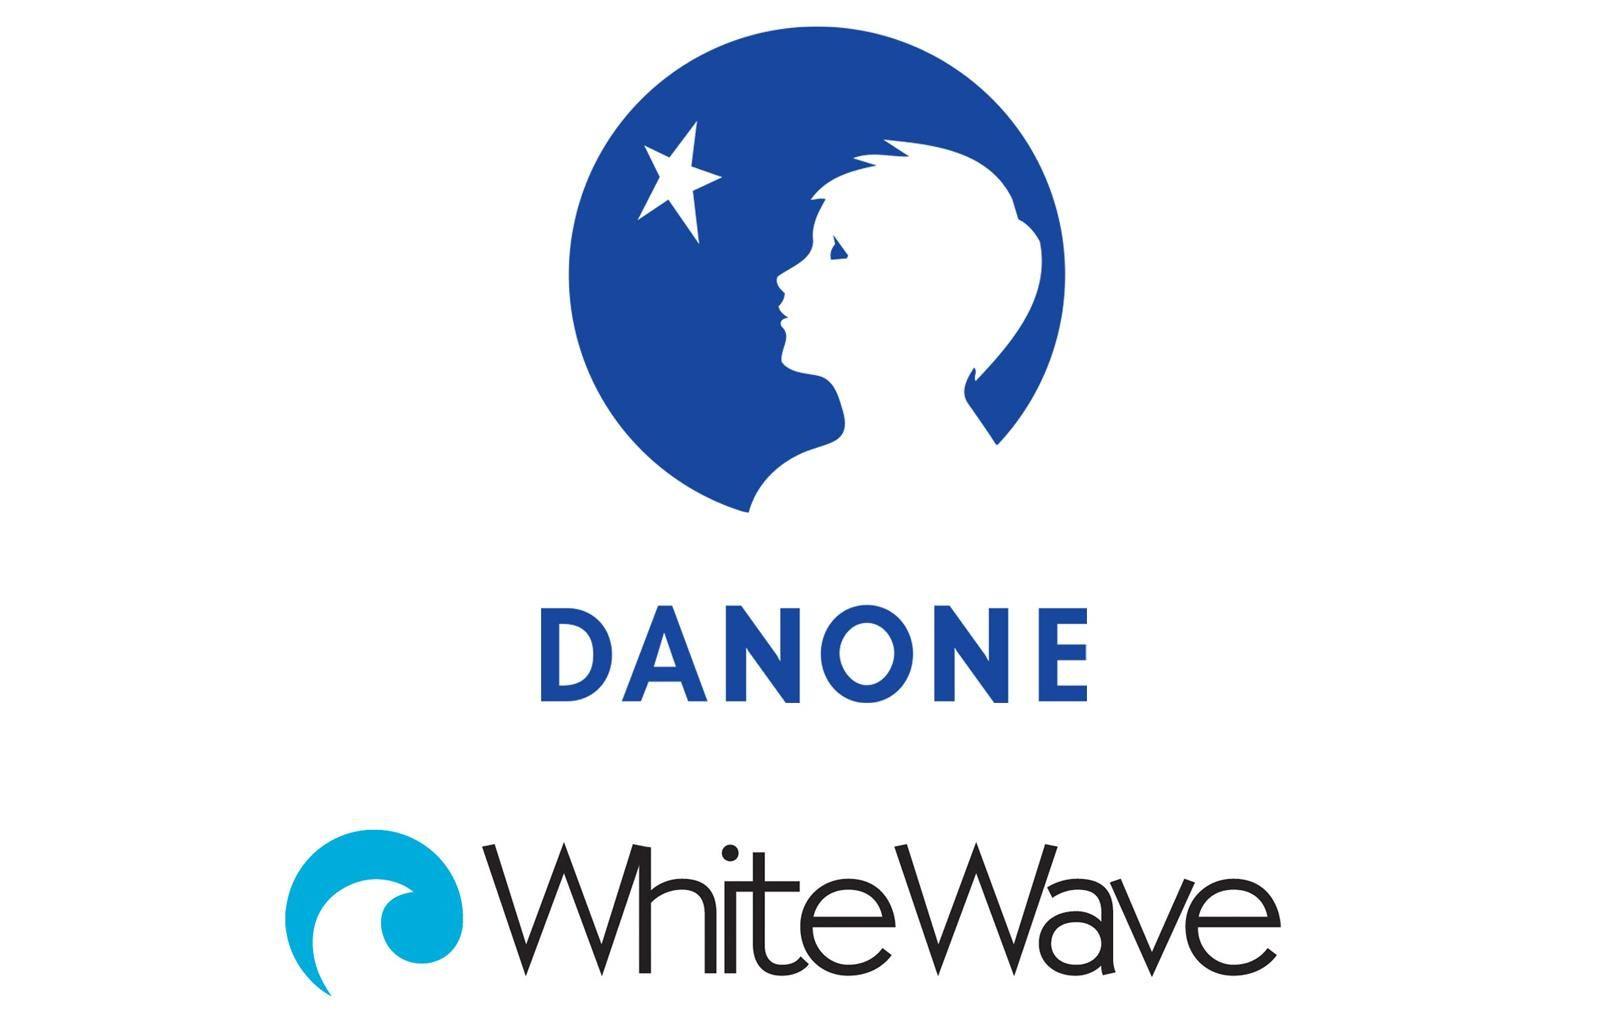 Blue and White Wave Logo - Understanding Danone's Acquisition of WhiteWave